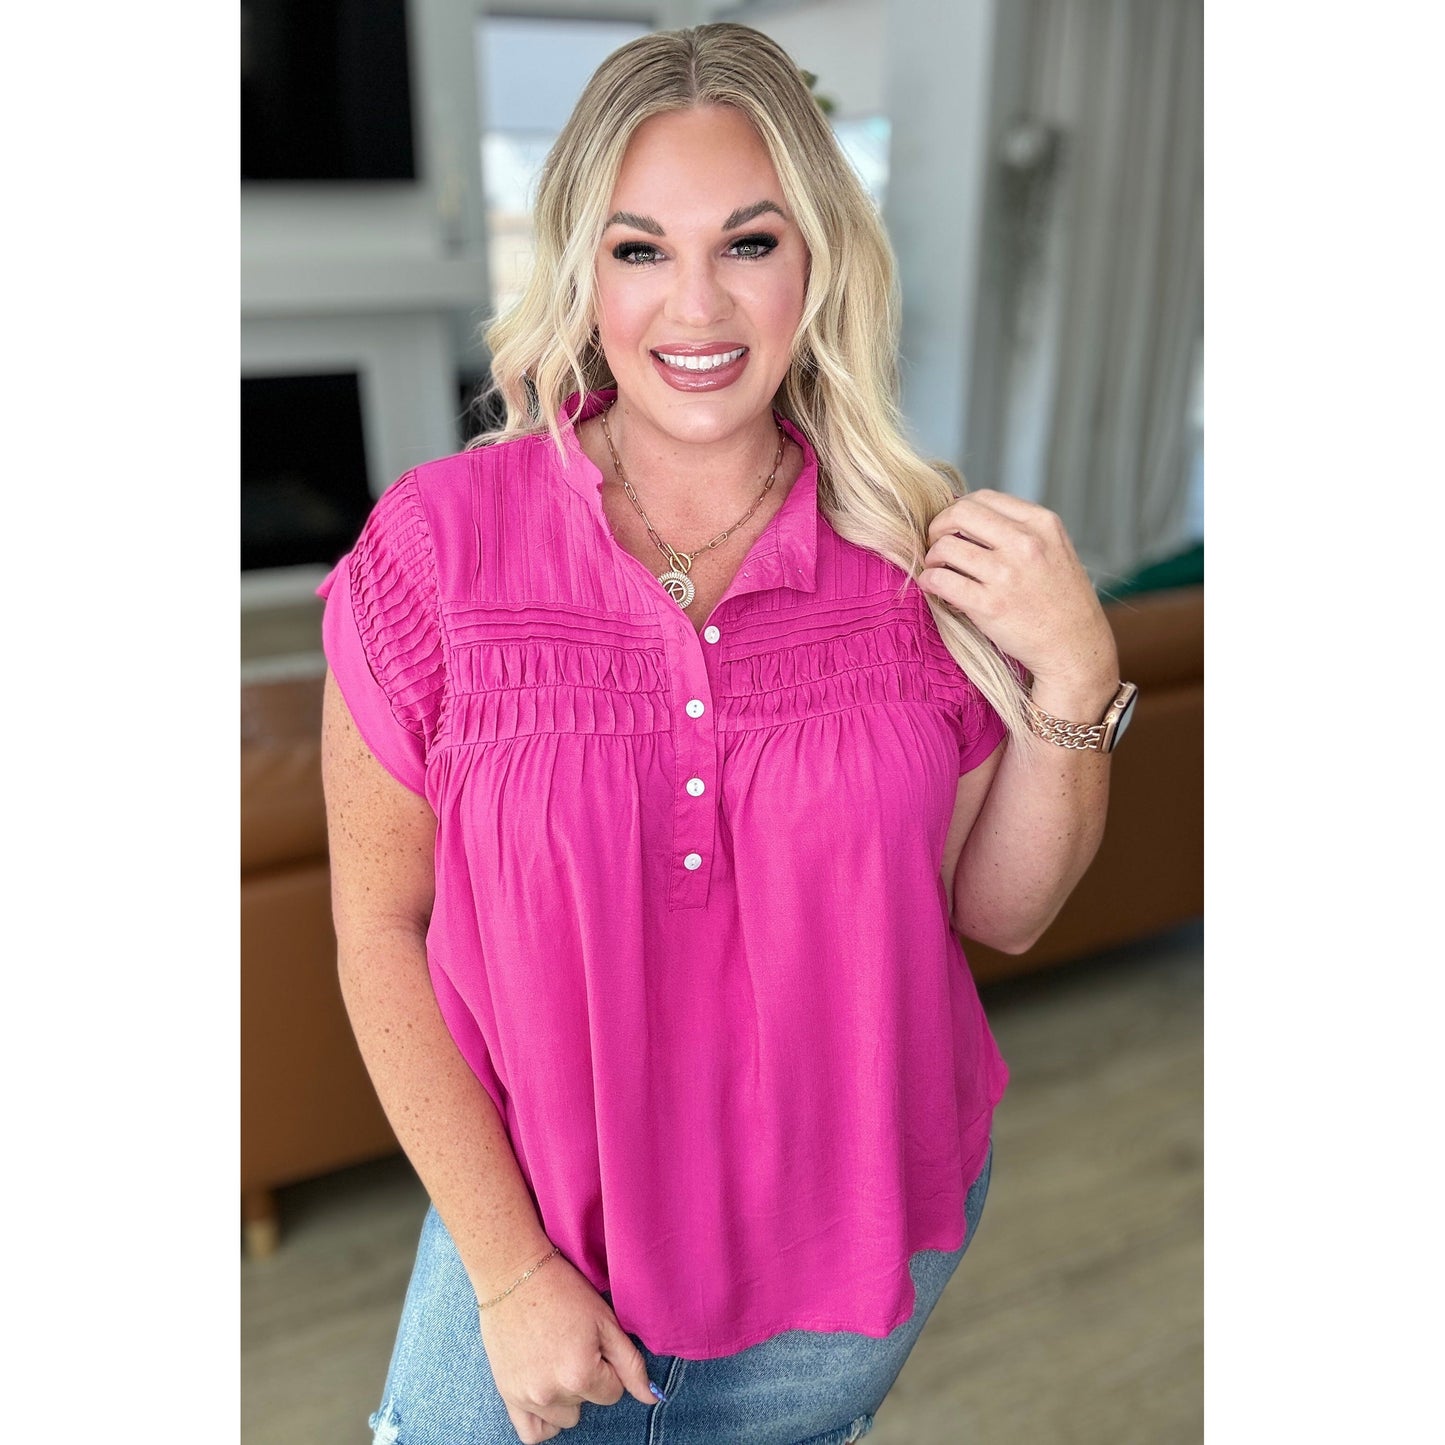 Pleat Detail Button Up Blouse in Hot Pink - Rhapsody and Renascence -Tops - 1XL, 2XL, 3XL, 4-24-2024, Andree By Unit, Large, Medium, Small, XL